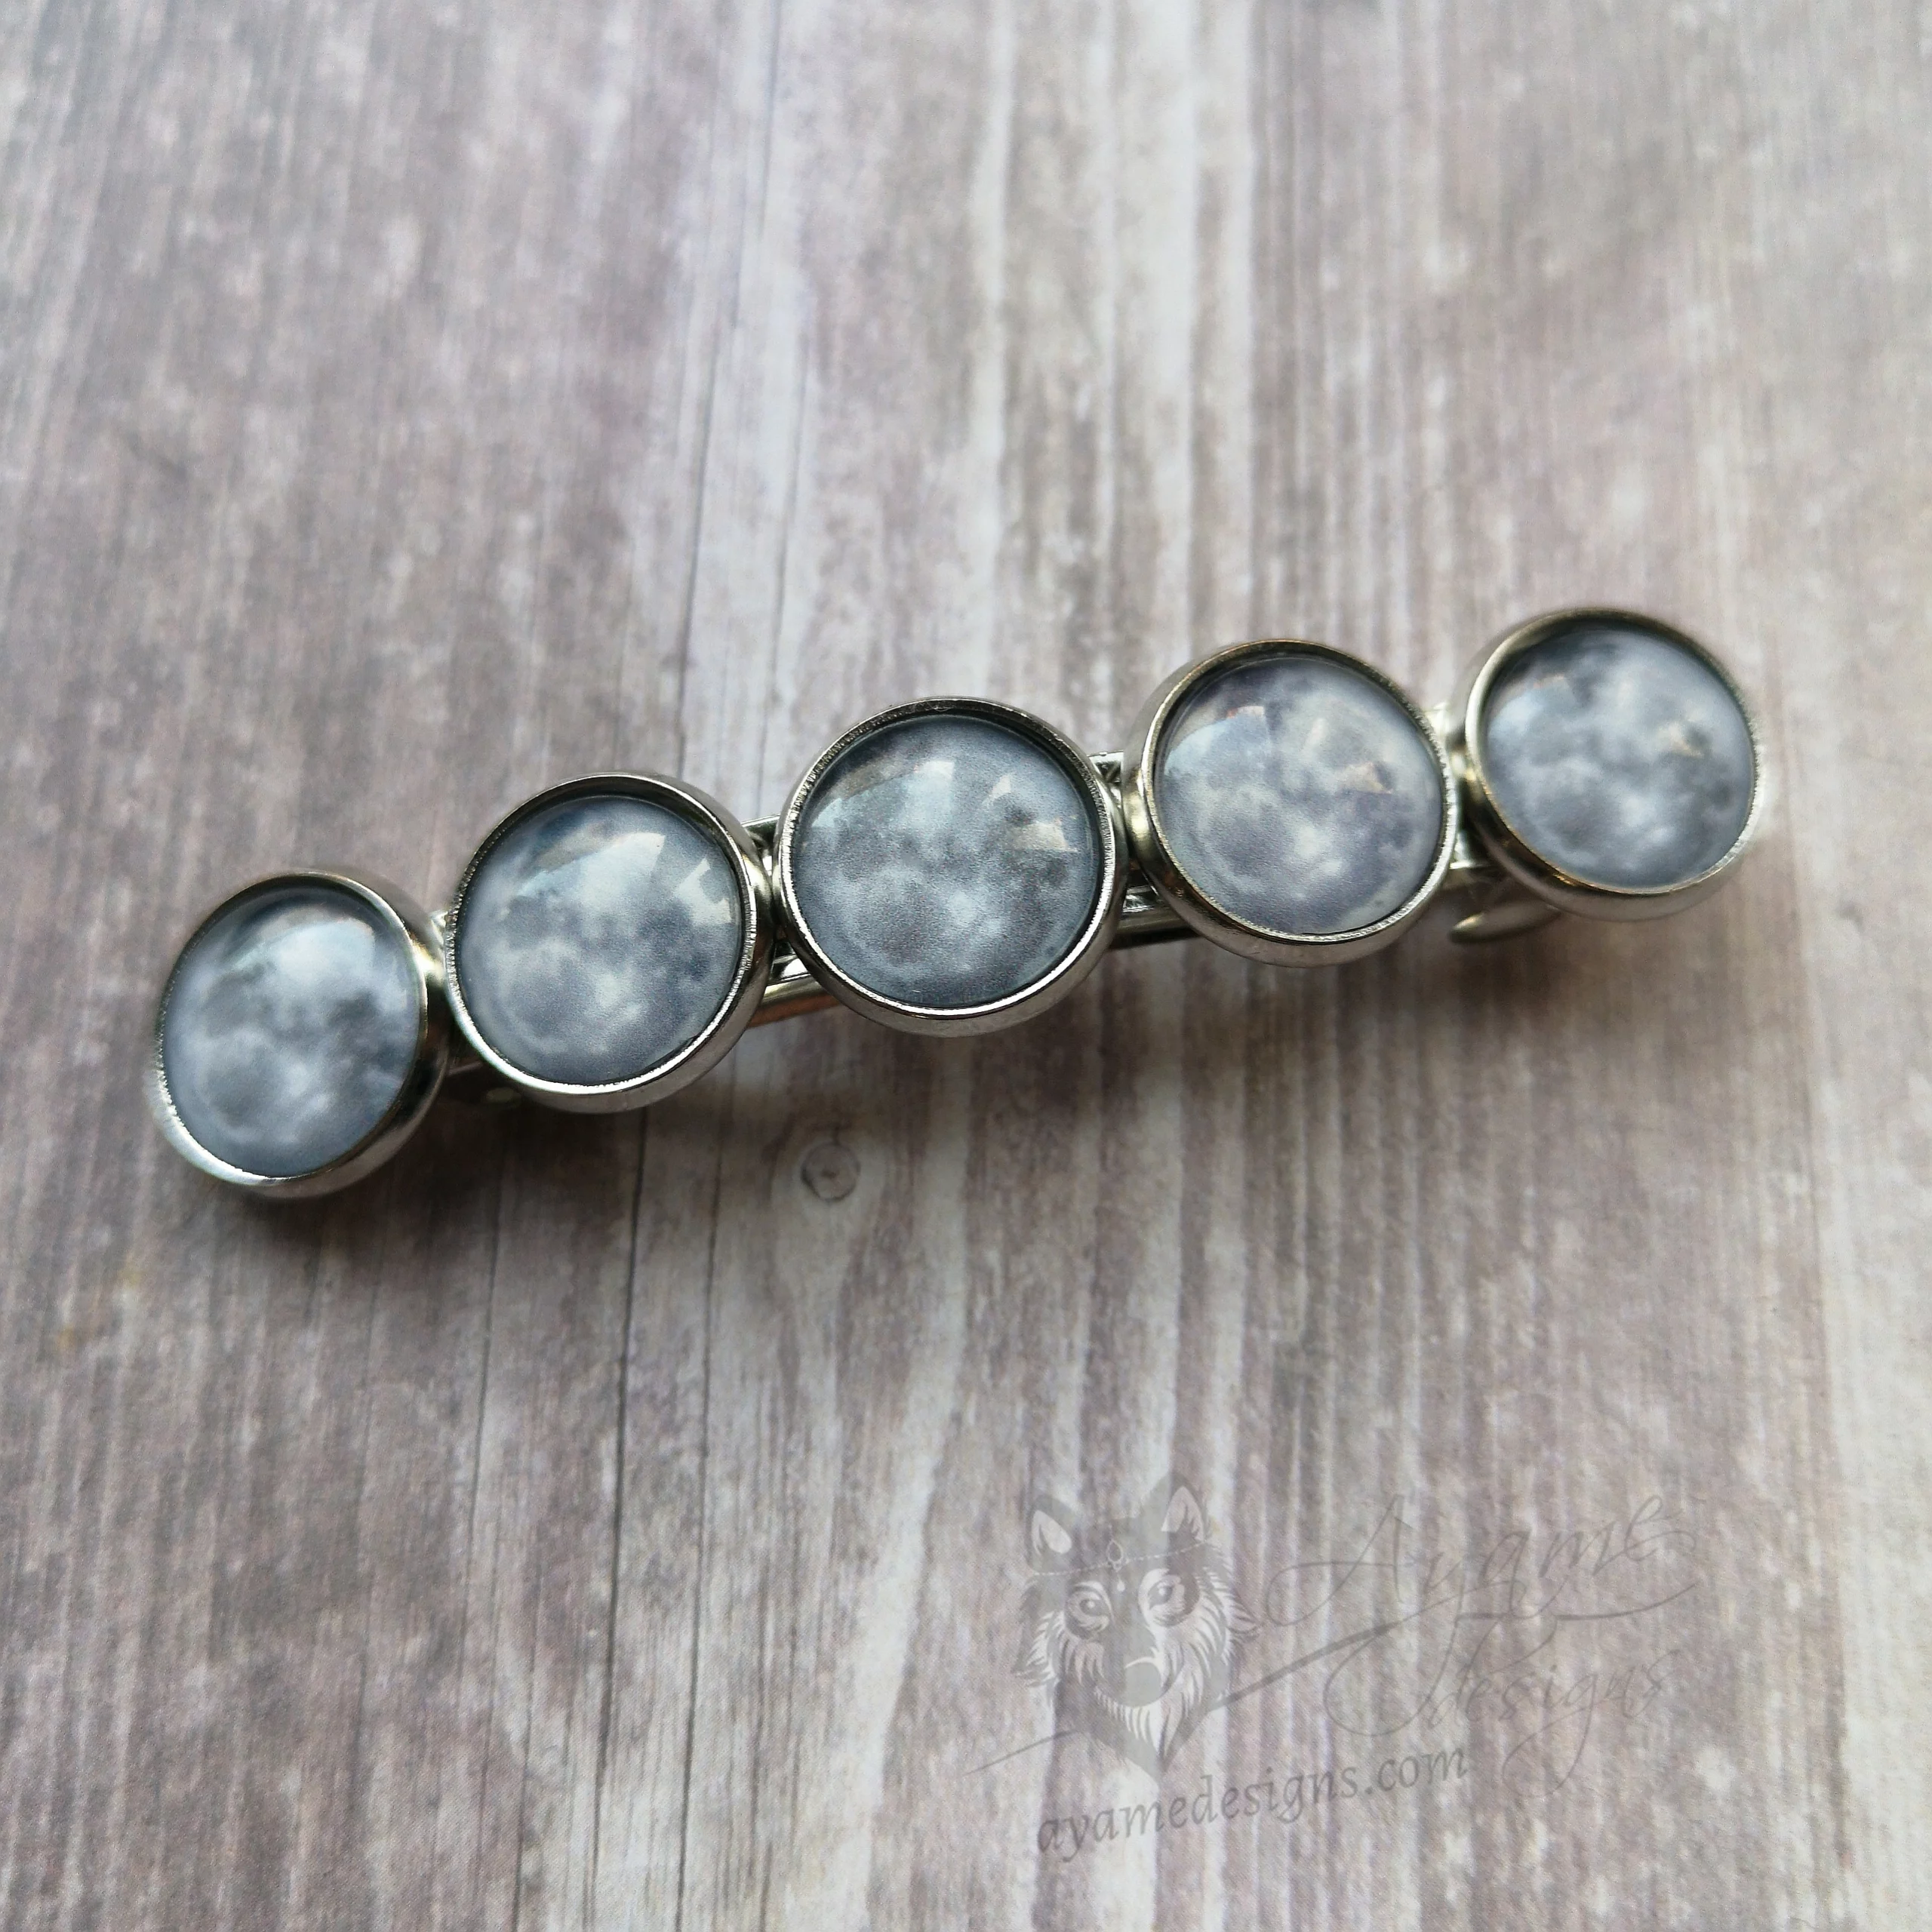 Hair barrette with full moon glass cabochons